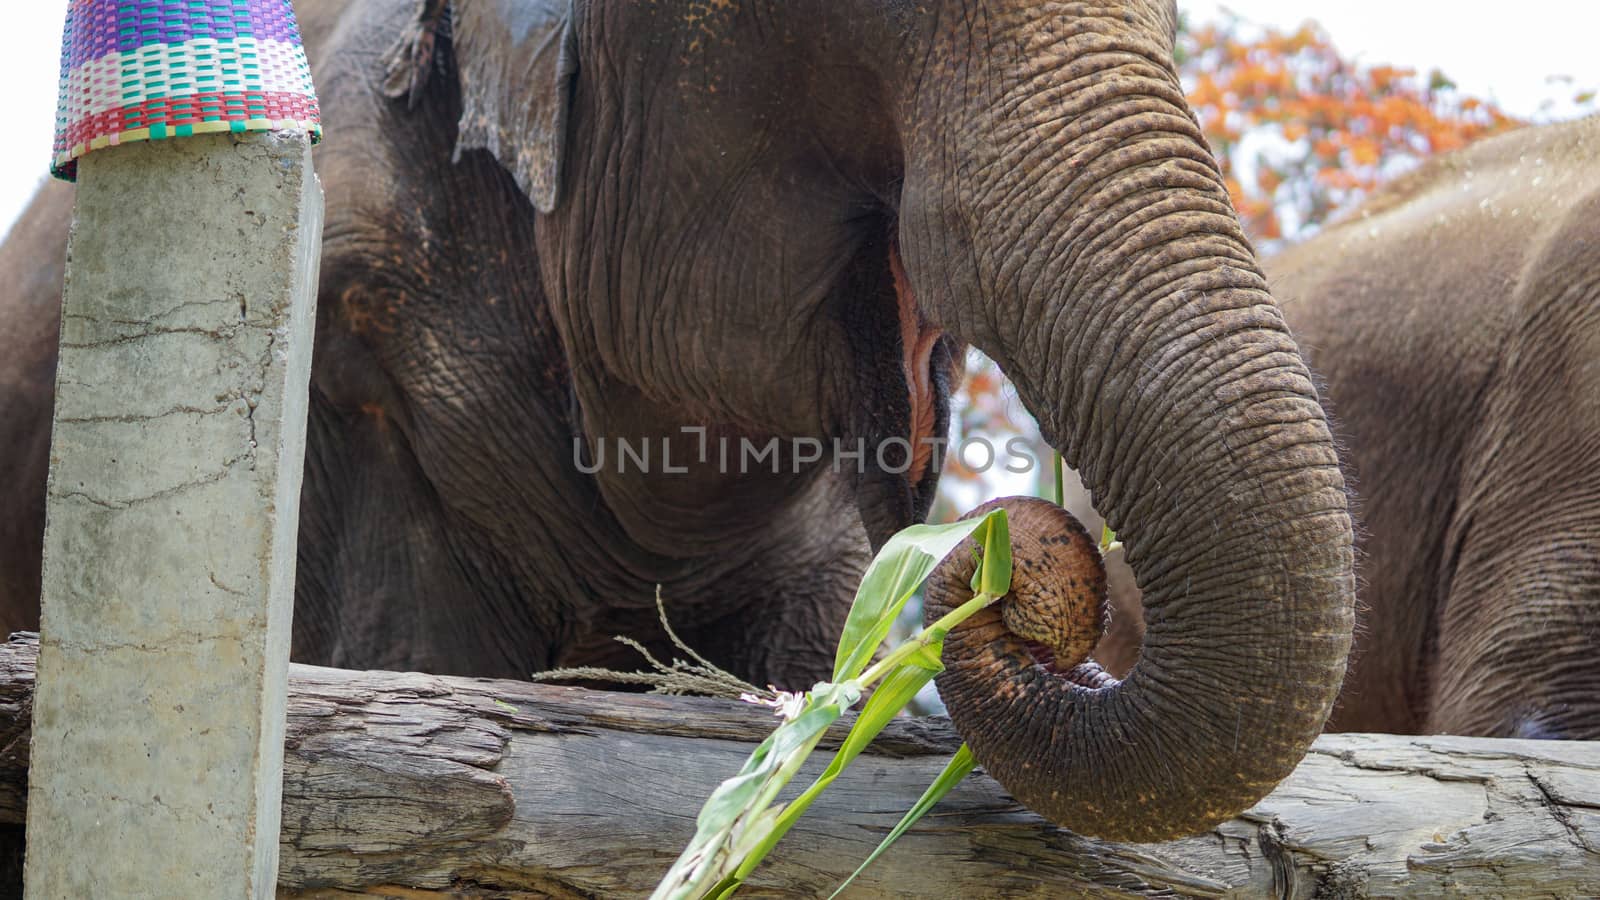 Close up of Elephants trunk while they are feeding on sugar cane and bamboo in Elephant Care Sanctuary, Mae Tang, Chiang Mai province, Thailand. by sonandonures